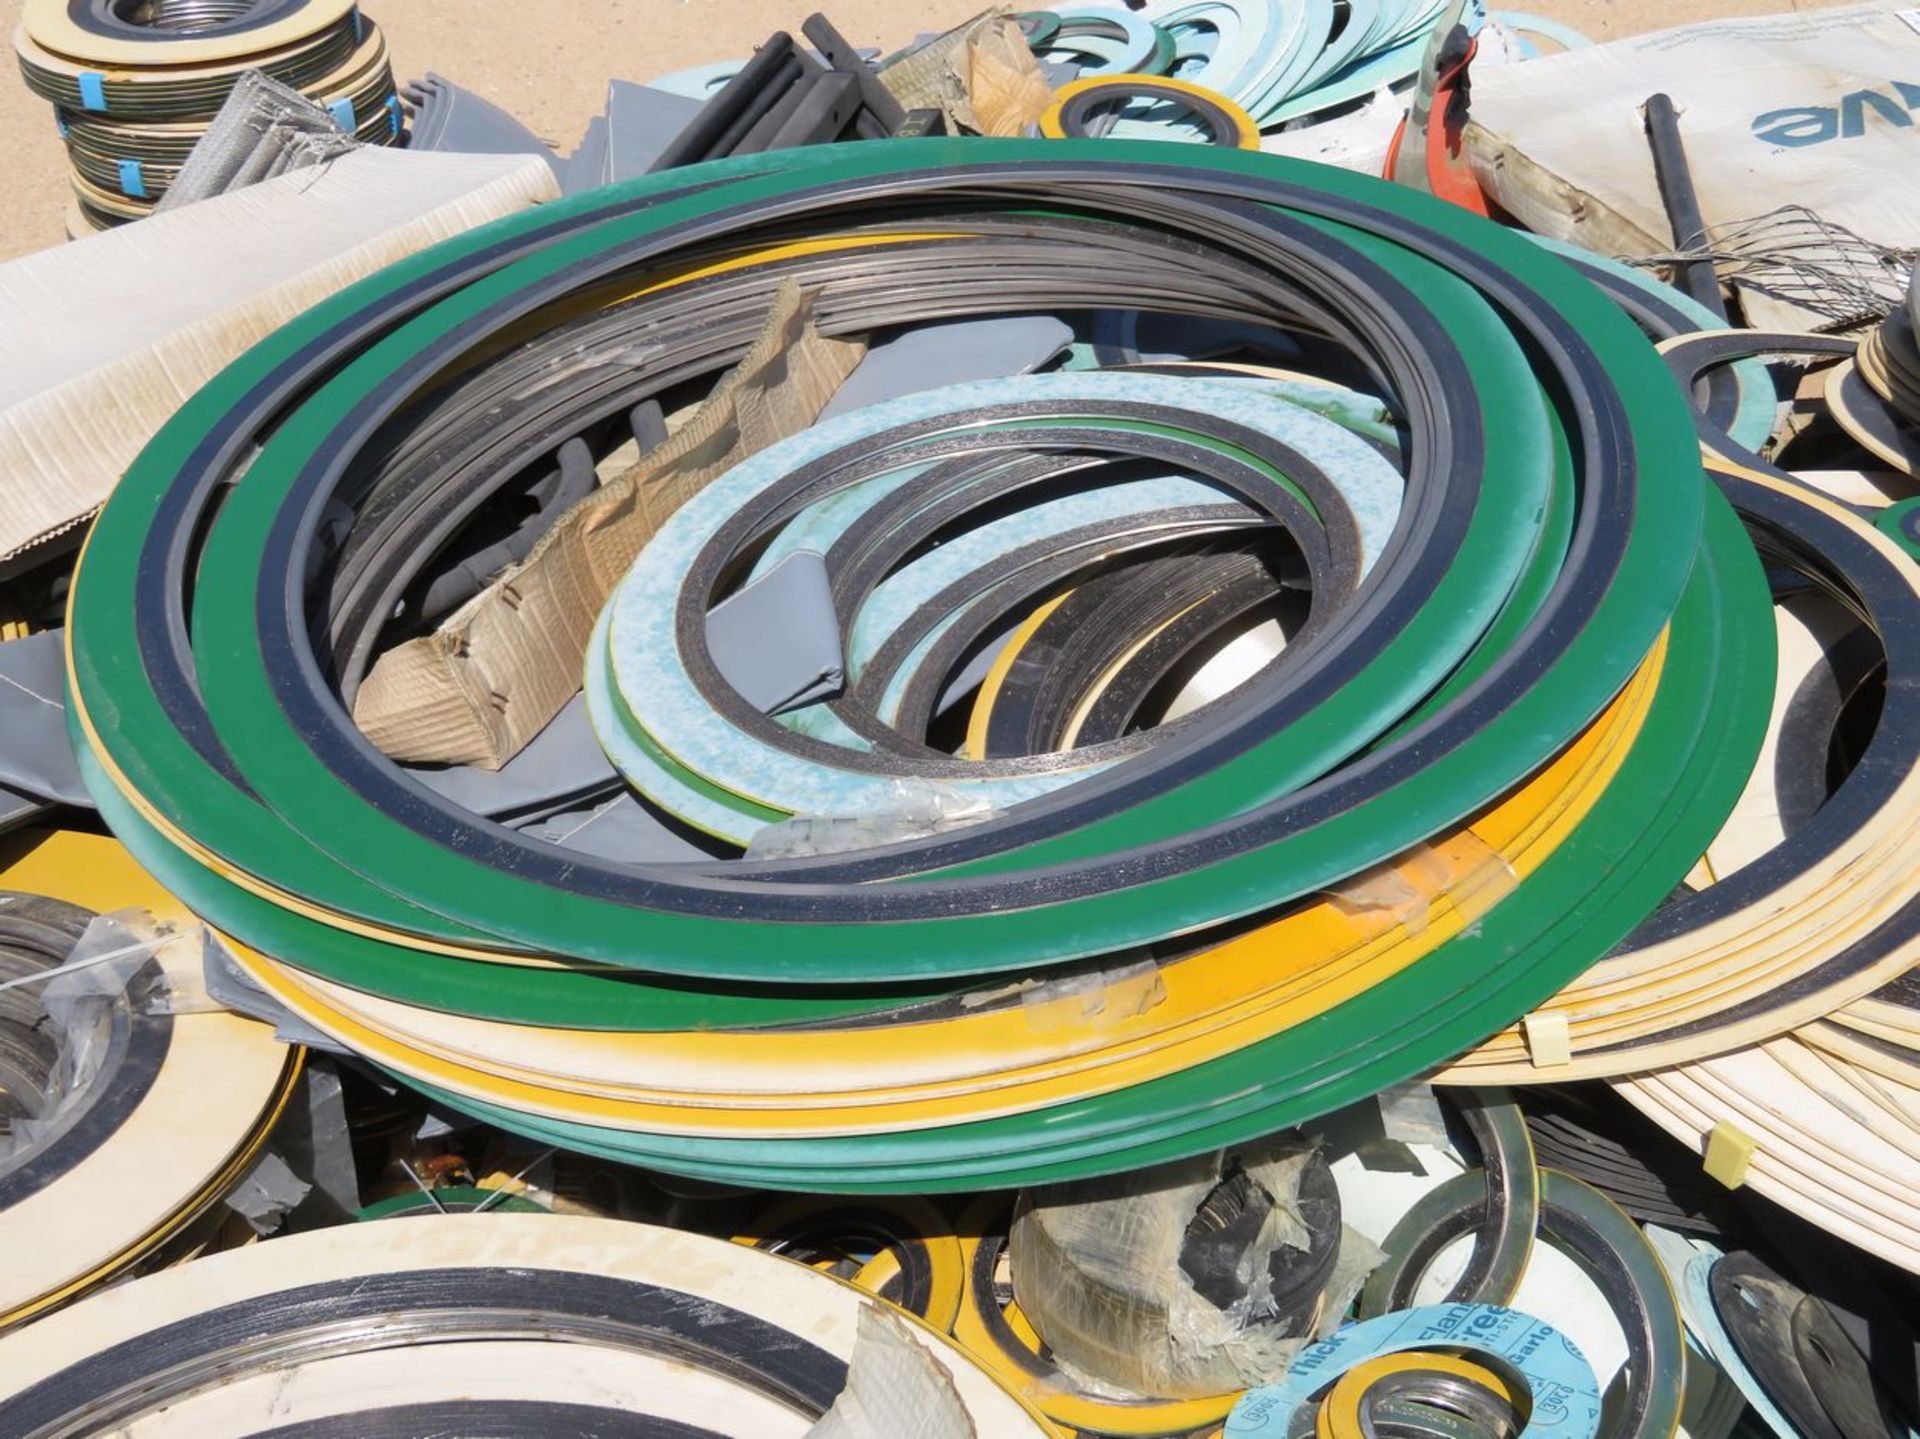 Large Qty of Spiral Wound Gaskets, Sizes Ranging from 35" to 3-1/2". Asset Located at 42134 Harper - Image 6 of 9